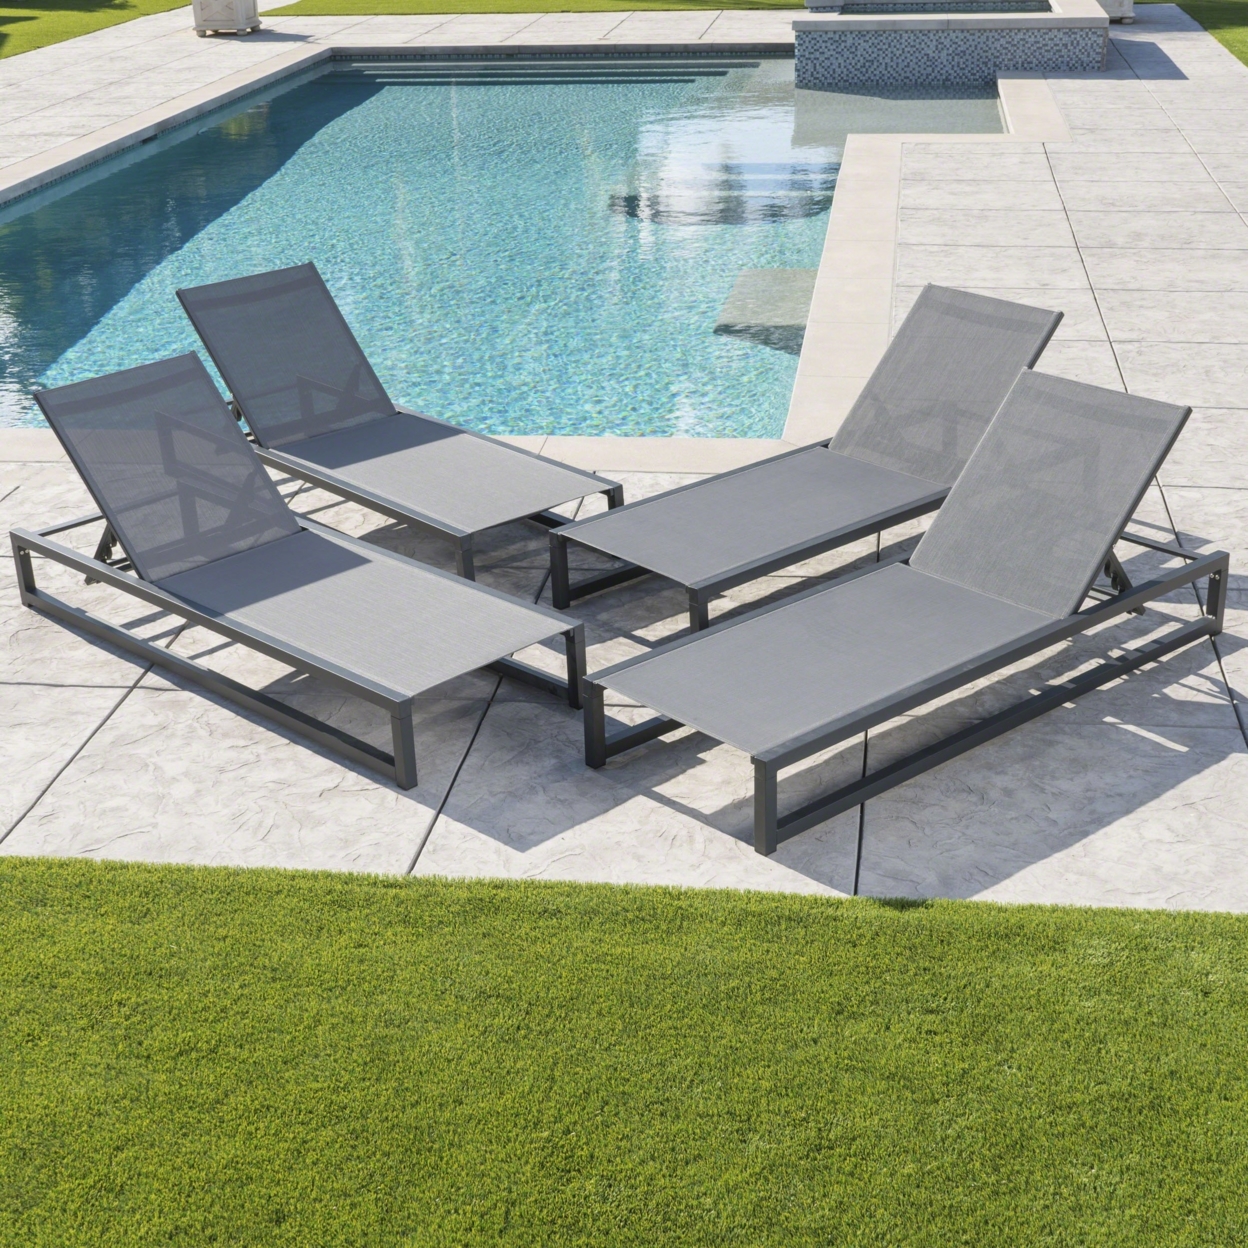 Mottetta Outdoor Finished Aluminum Framed Chaise Lounge With Mesh Body - Black/gray, Set Of 4